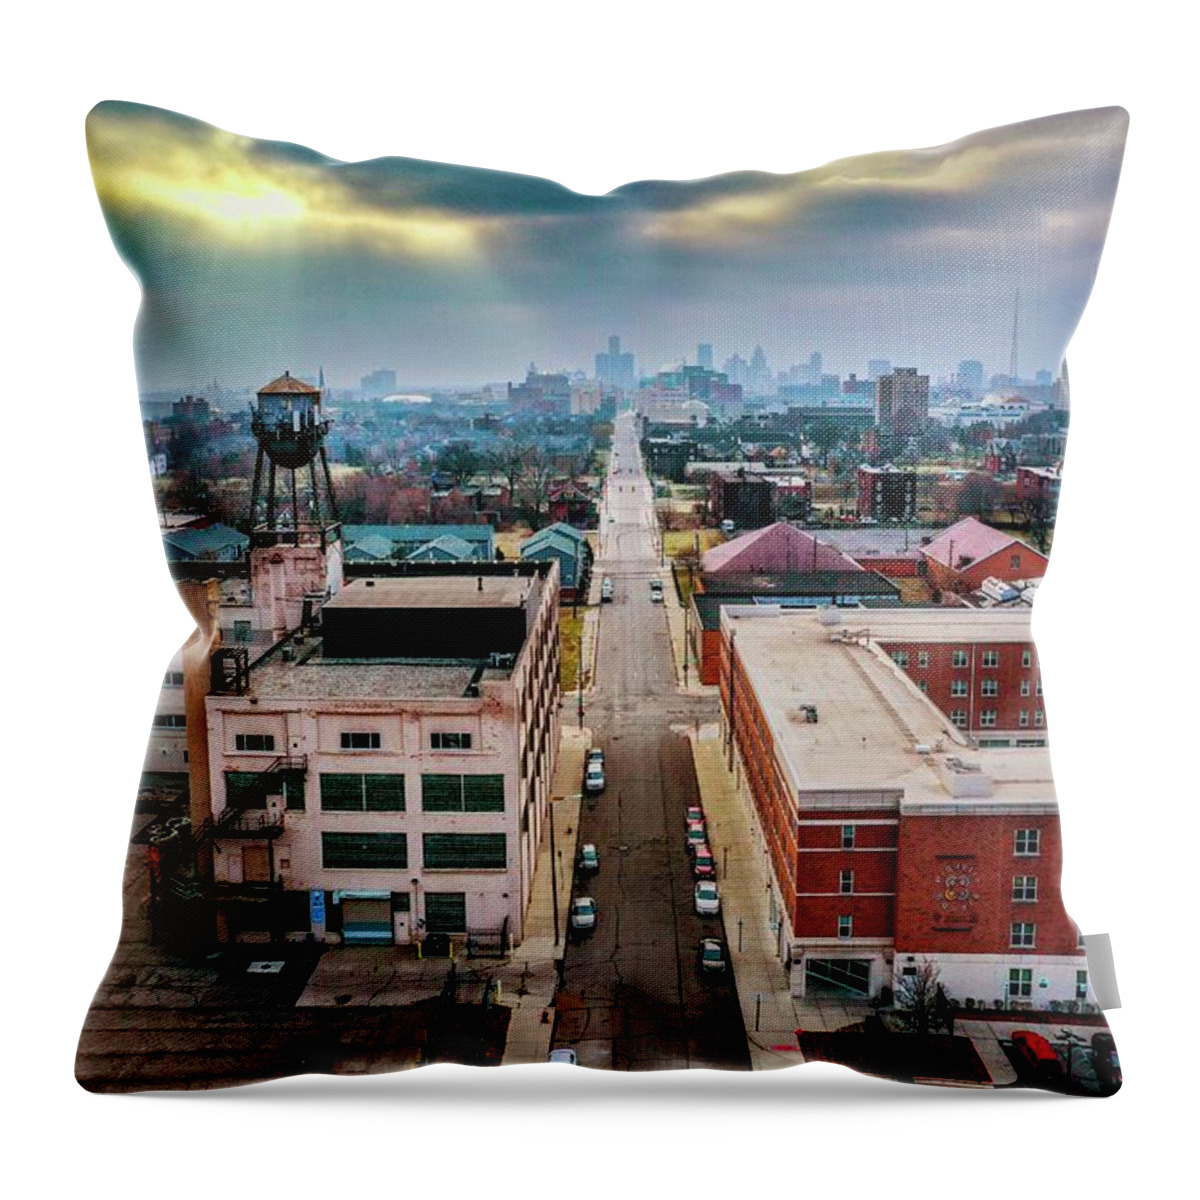 Detroit Throw Pillow featuring the photograph Watertower Skyline DJI_0690 by Michael Thomas